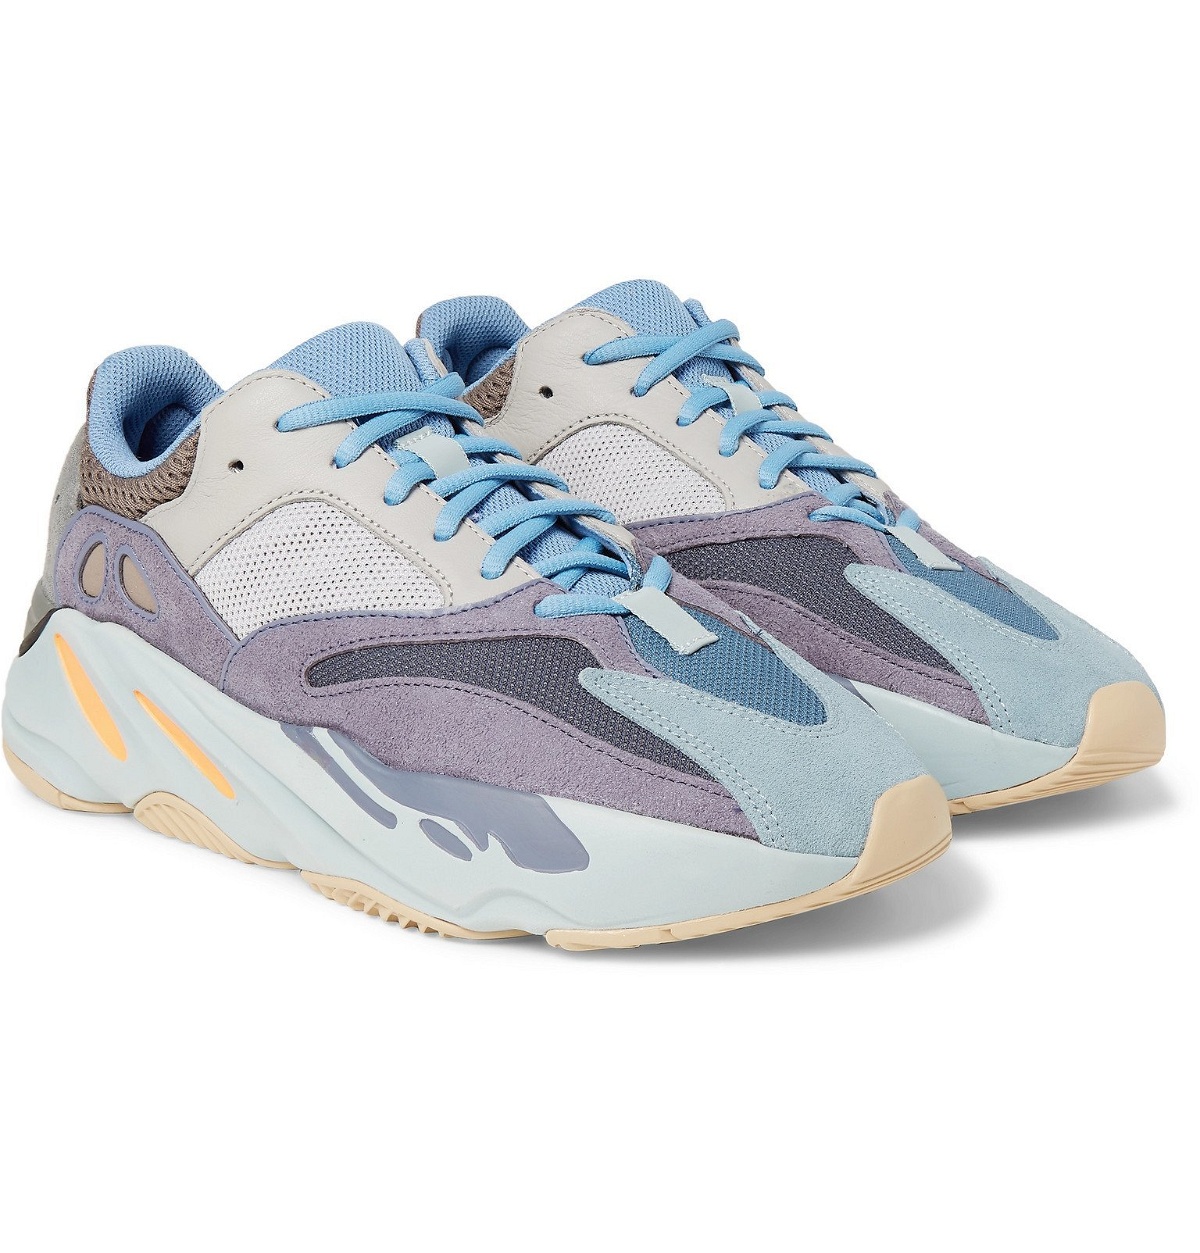 Photo: adidas Originals - Yeezy Boost 700 Suede, Leather and Mesh Sneakers - Blue